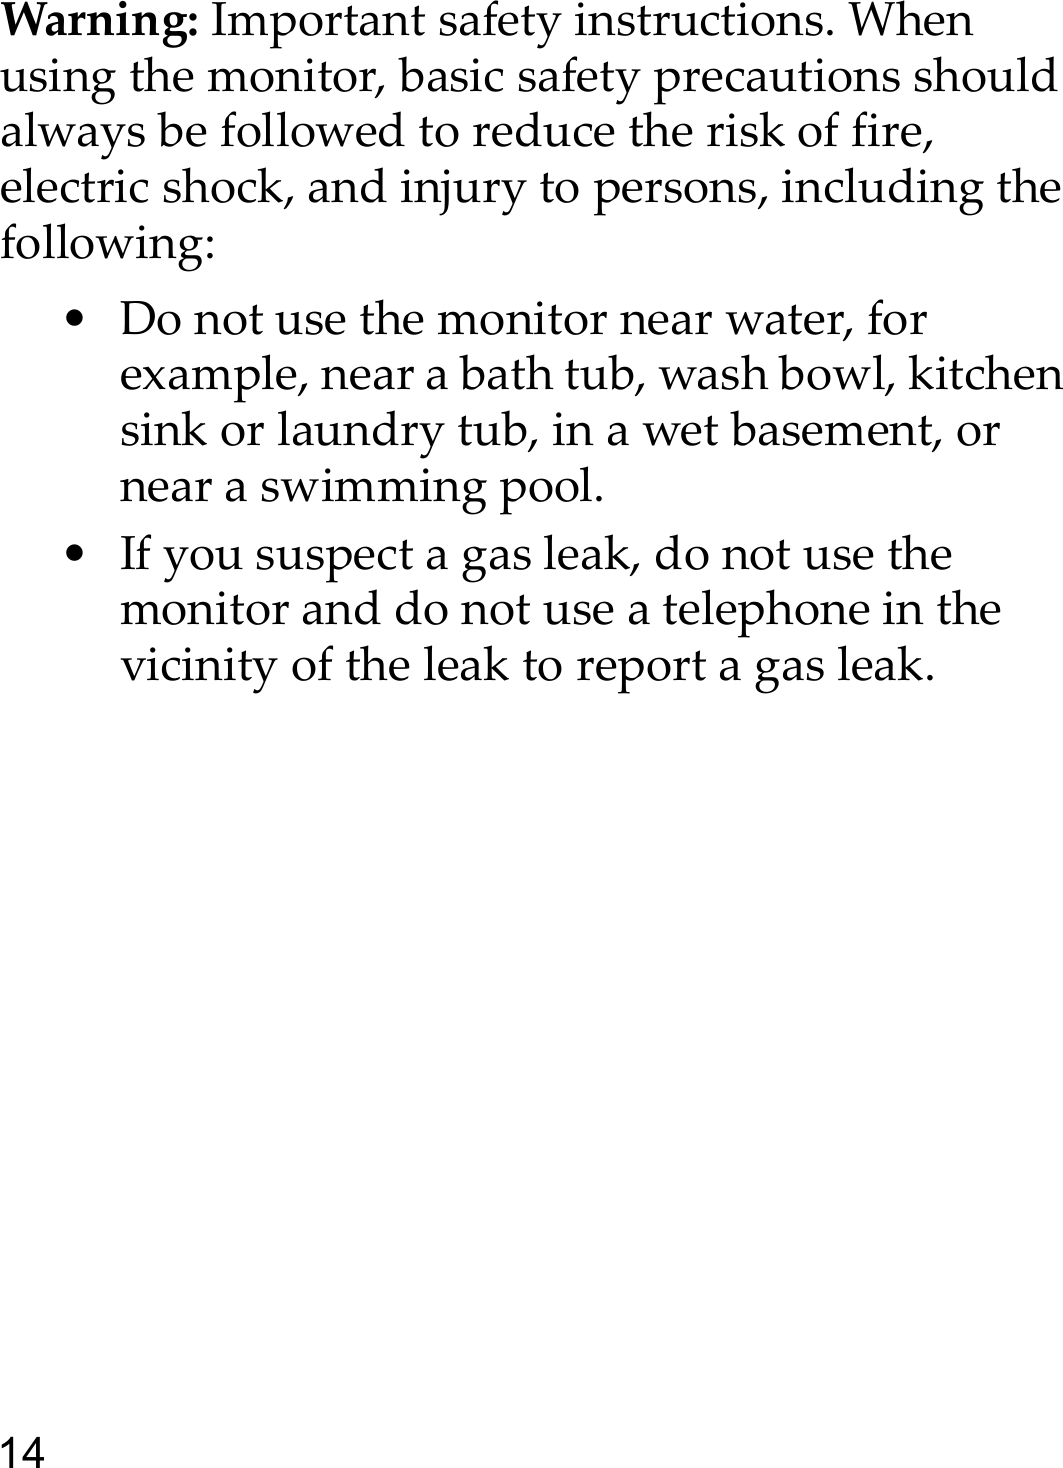 14Warning: Important safety instructions. When using the monitor, basic safety precautions should always be followed to reduce the risk of fire, electric shock, and injury to persons, including the following:• Do not use the monitor near water, for example, near a bath tub, wash bowl, kitchen sink or laundry tub, in a wet basement, or near a swimming pool.• If you suspect a gas leak, do not use the monitor and do not use a telephone in the vicinity of the leak to report a gas leak.